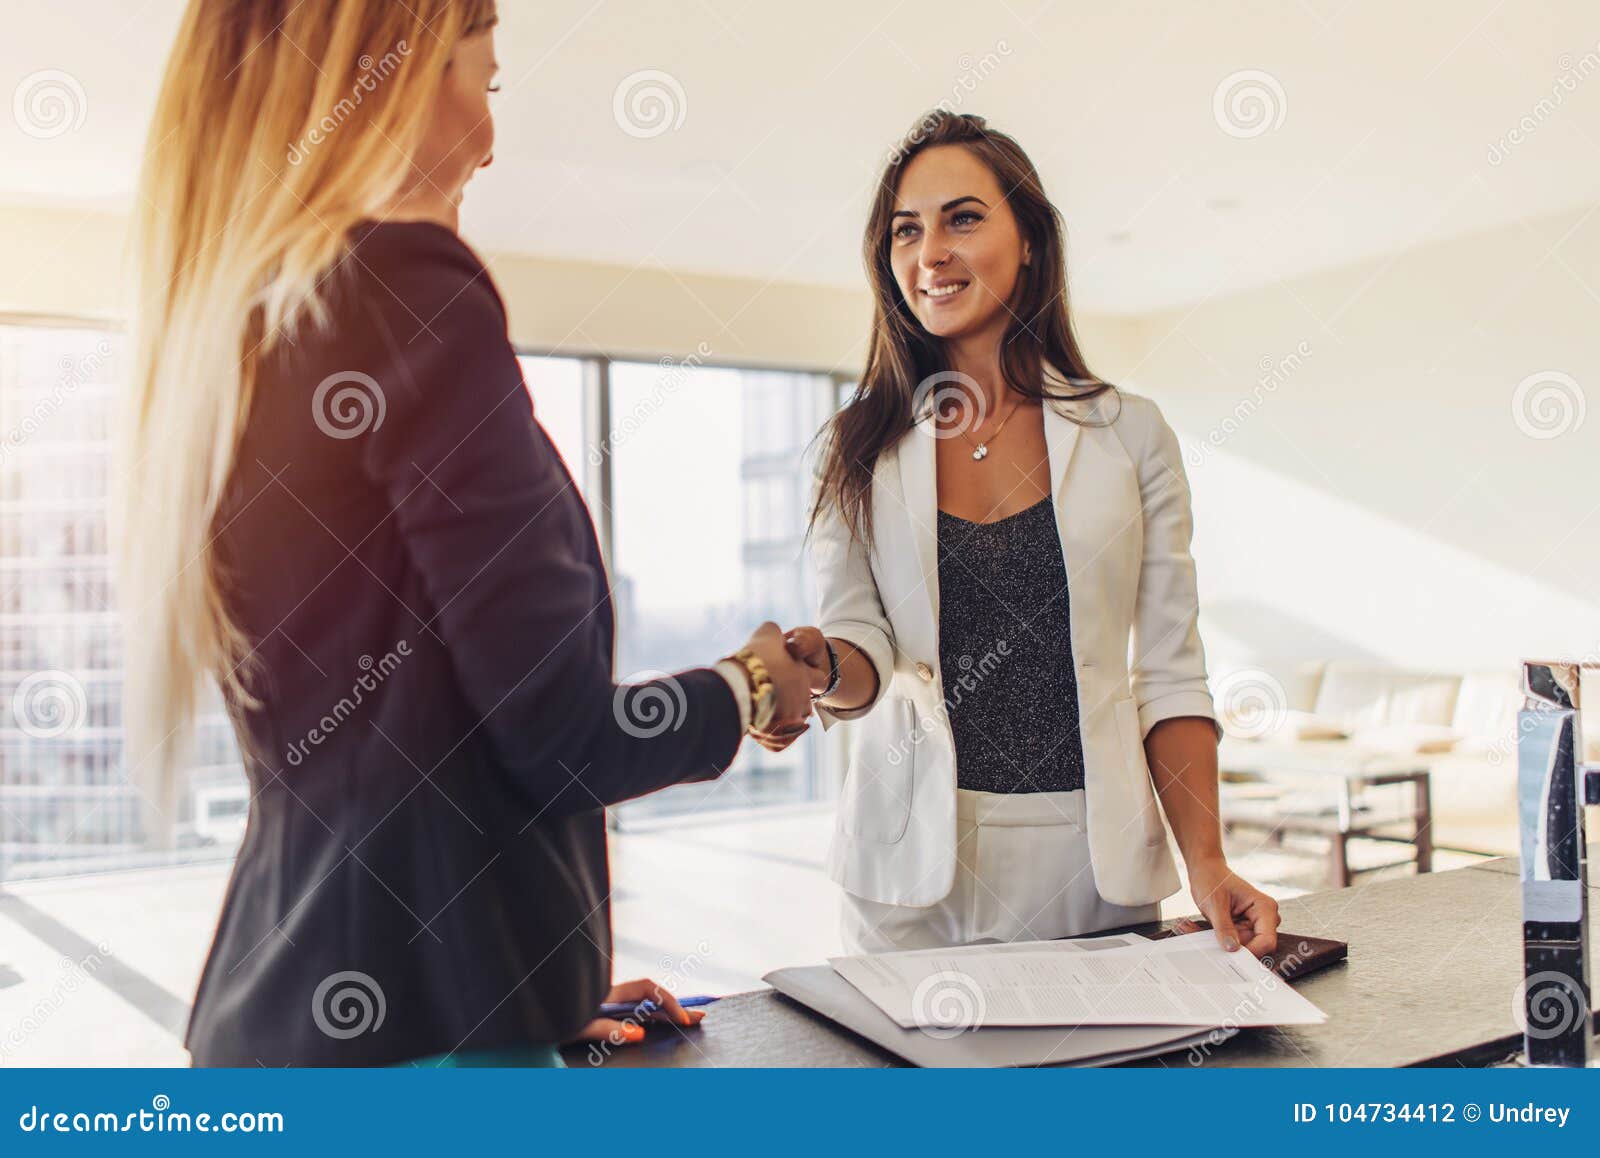 female customer shaking hands with real estate agent agreeing to sign a contract standing in new modern studio apartment